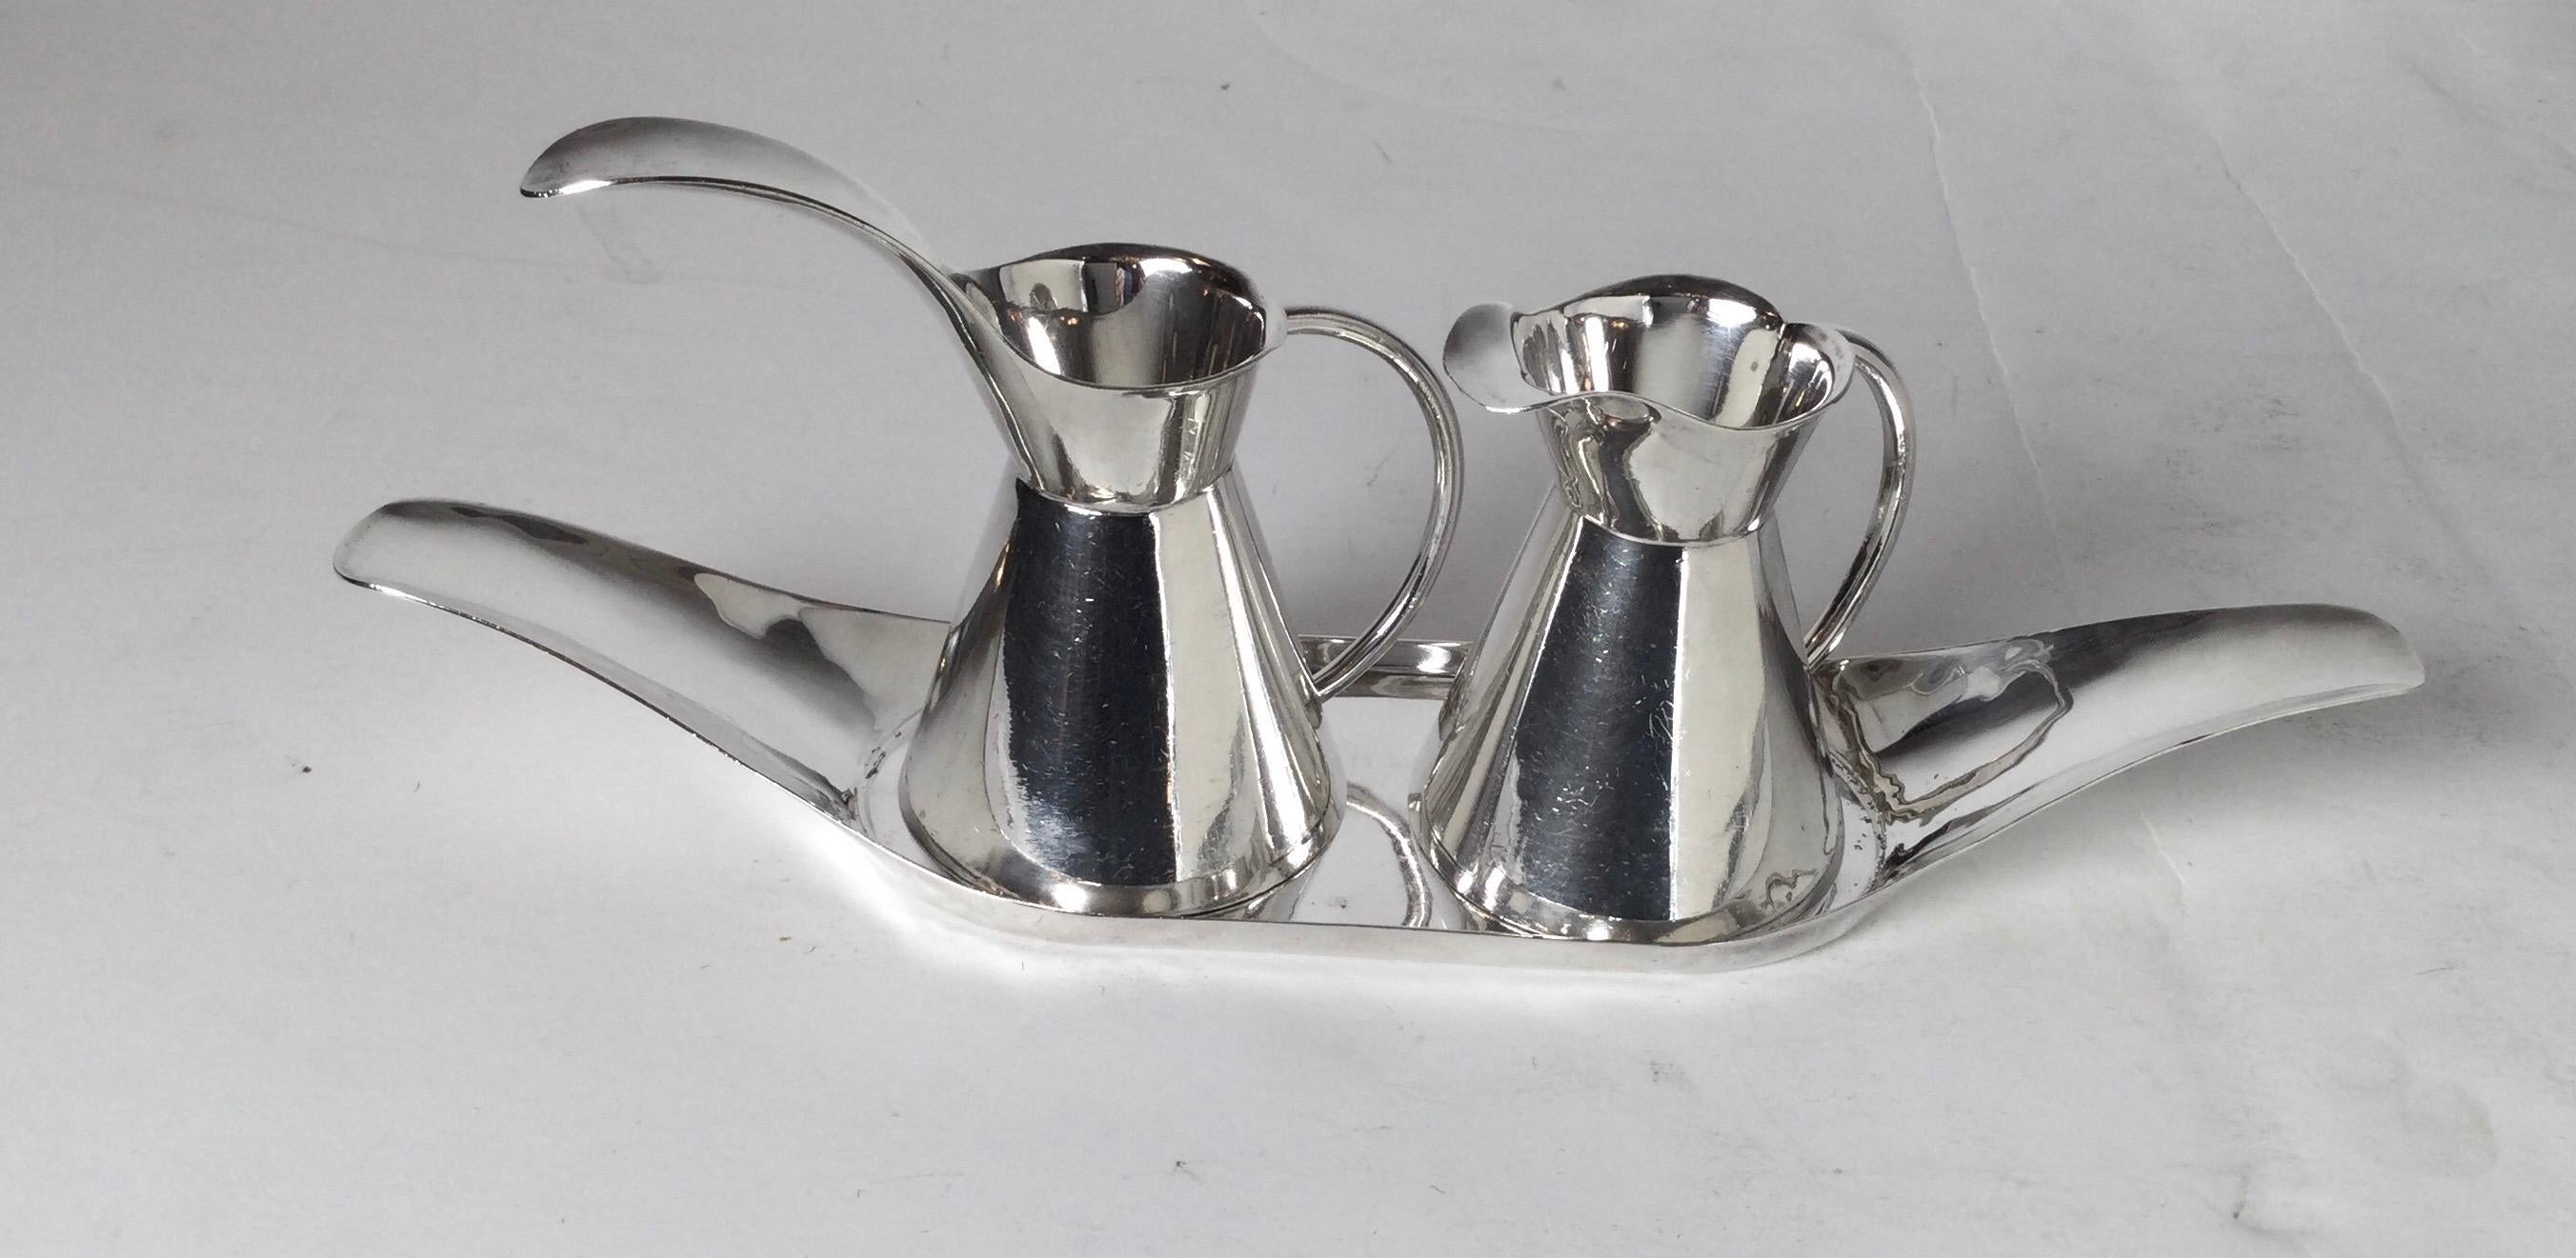 Midcentury Mexican sterling silver condiment set by Sanborn, two loop handled decanters residing on an elegant tray. The decanters are sculptural in form. Excellent condition
Dimensions: 3.75